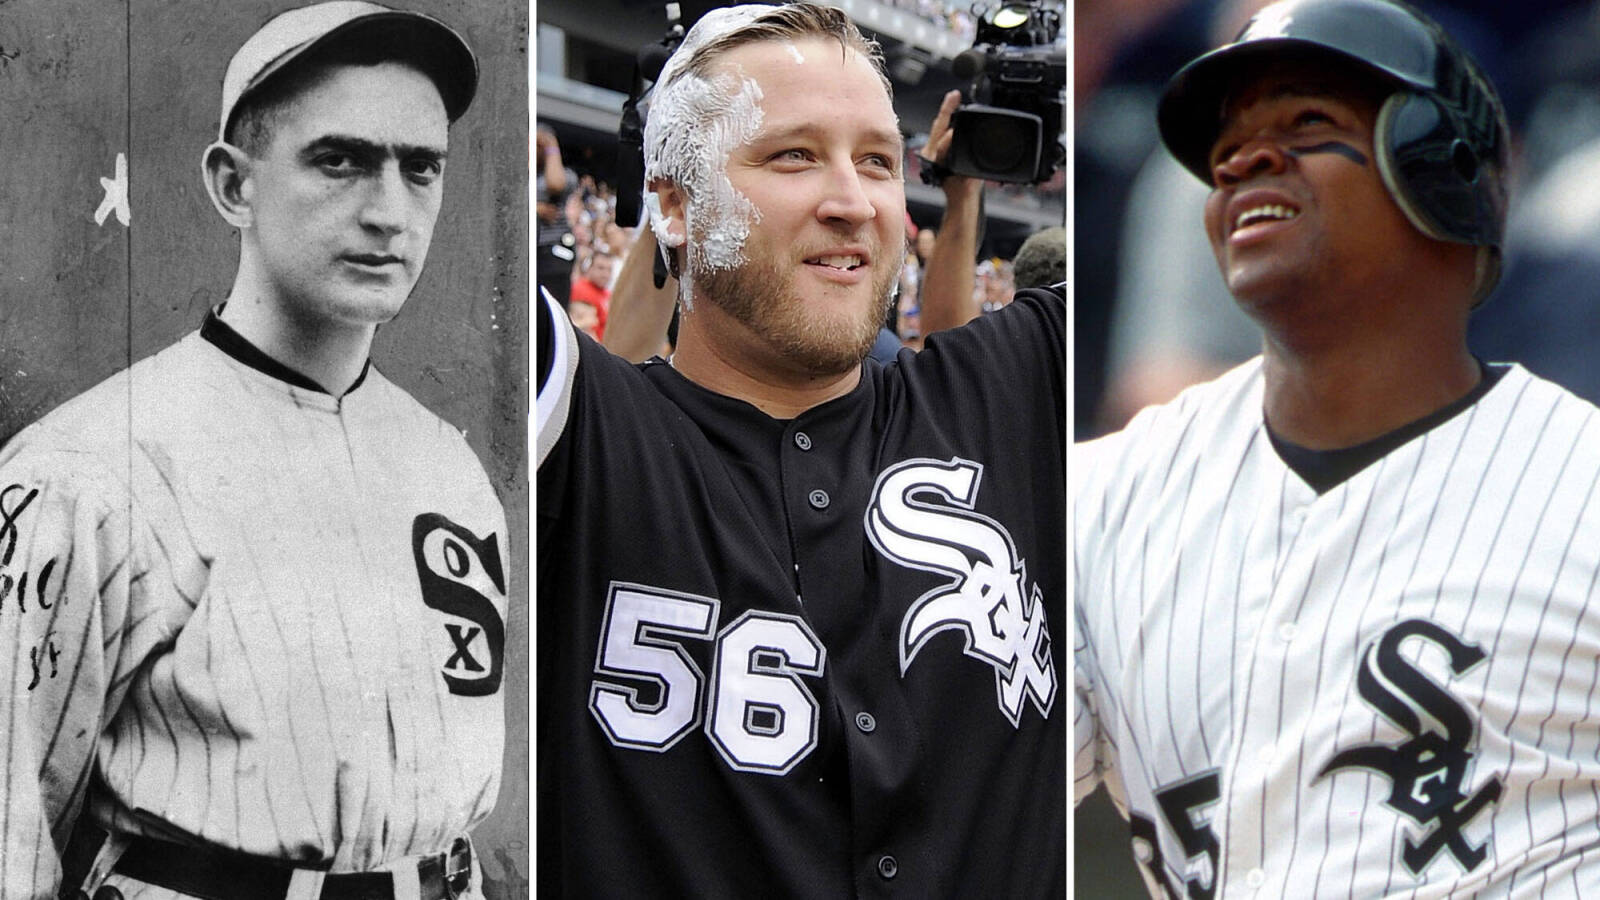 The White Sox are busting out their 1976 throwback uniforms